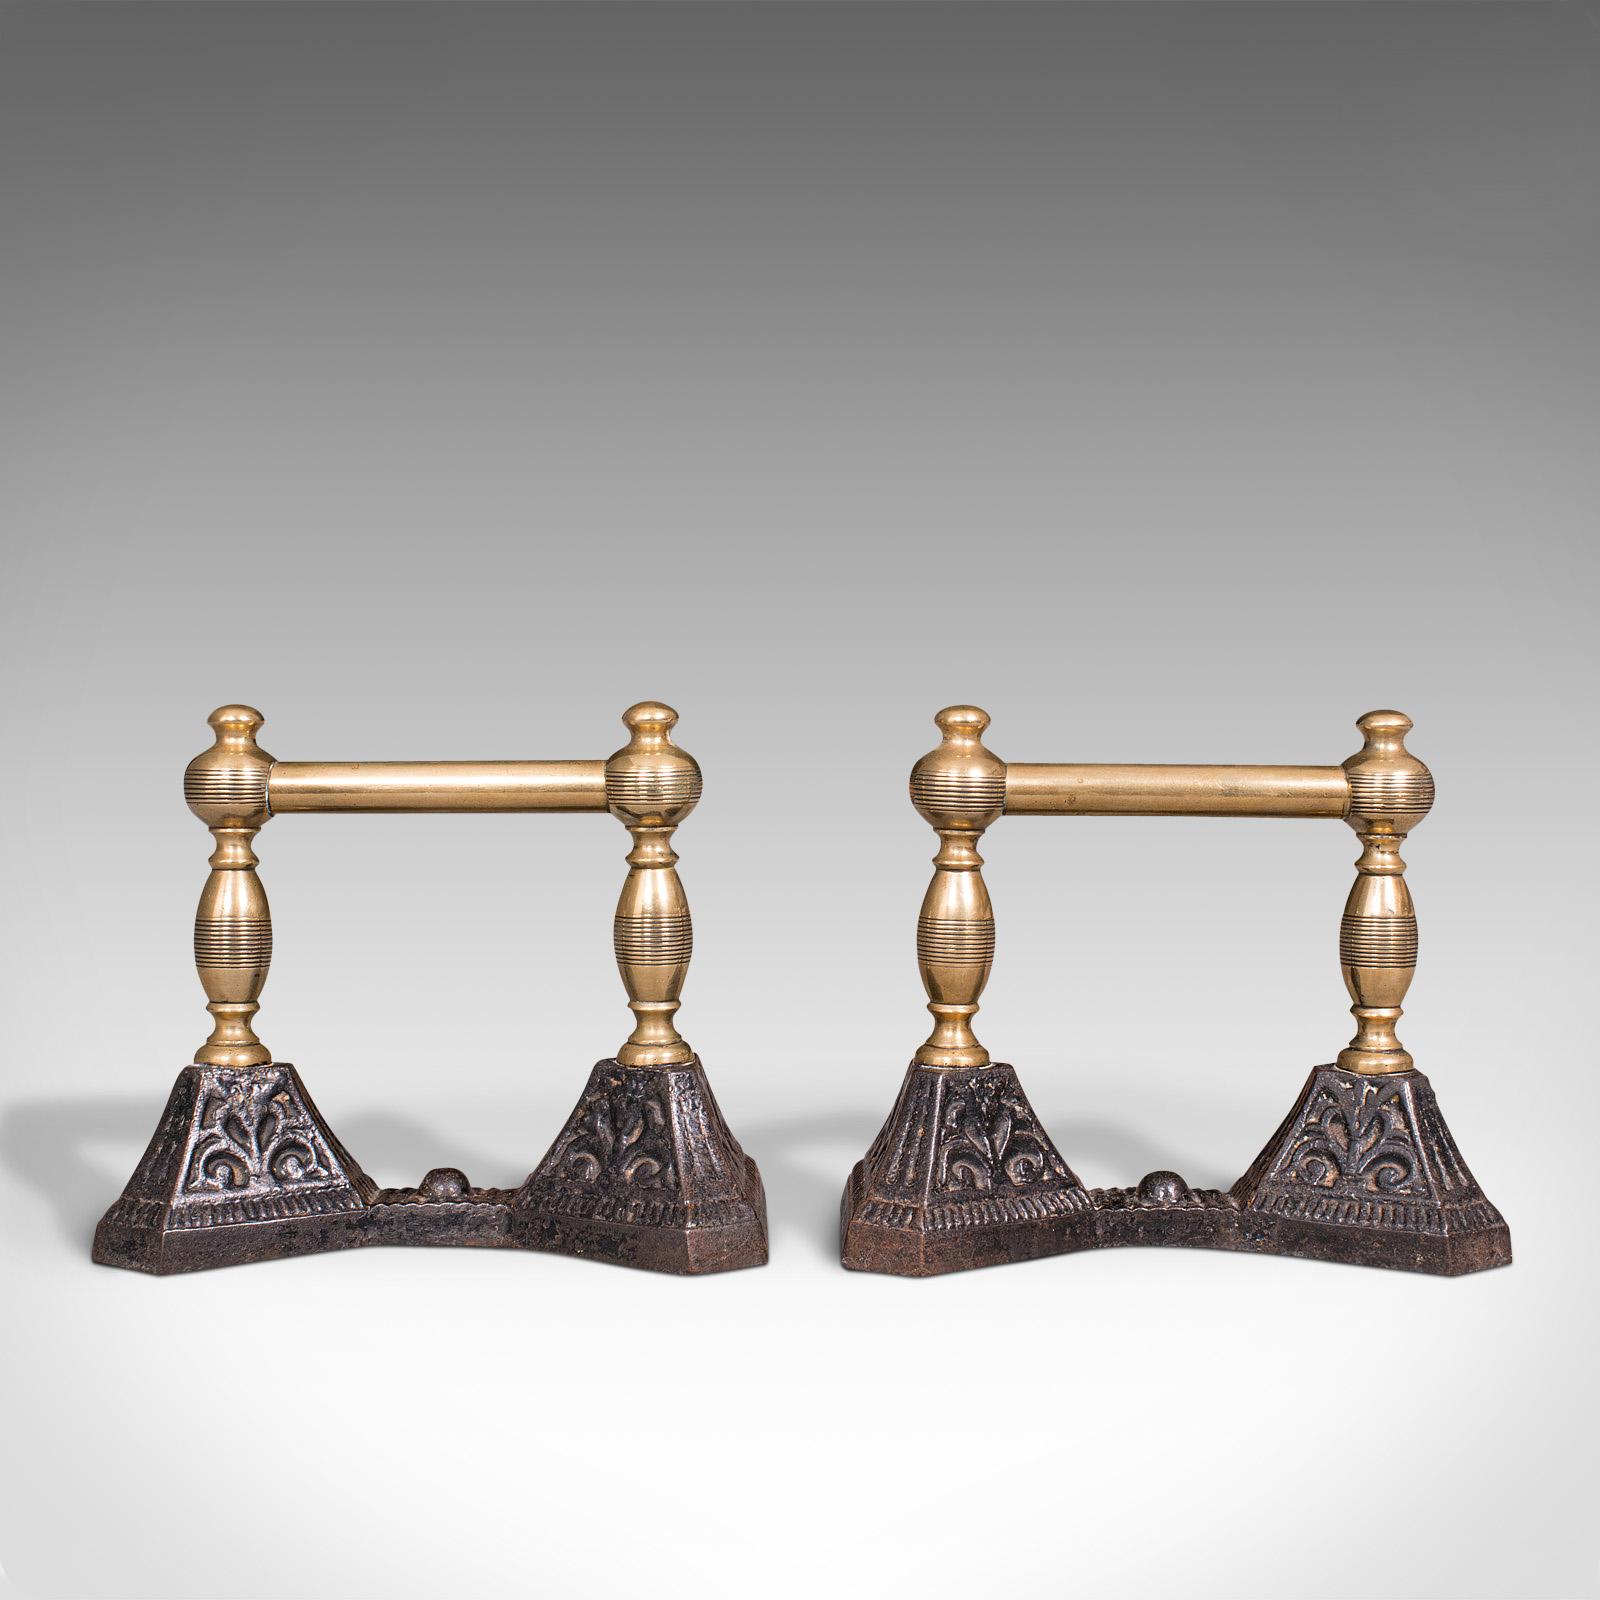 This is a pair of antique fireside tool rests. An English, brass and cast iron fire dog or andiron, dating to the Victorian period, circa 1880.

Appealing antique pair of fireside tool rests
Displaying classical overtones and a desirable aged